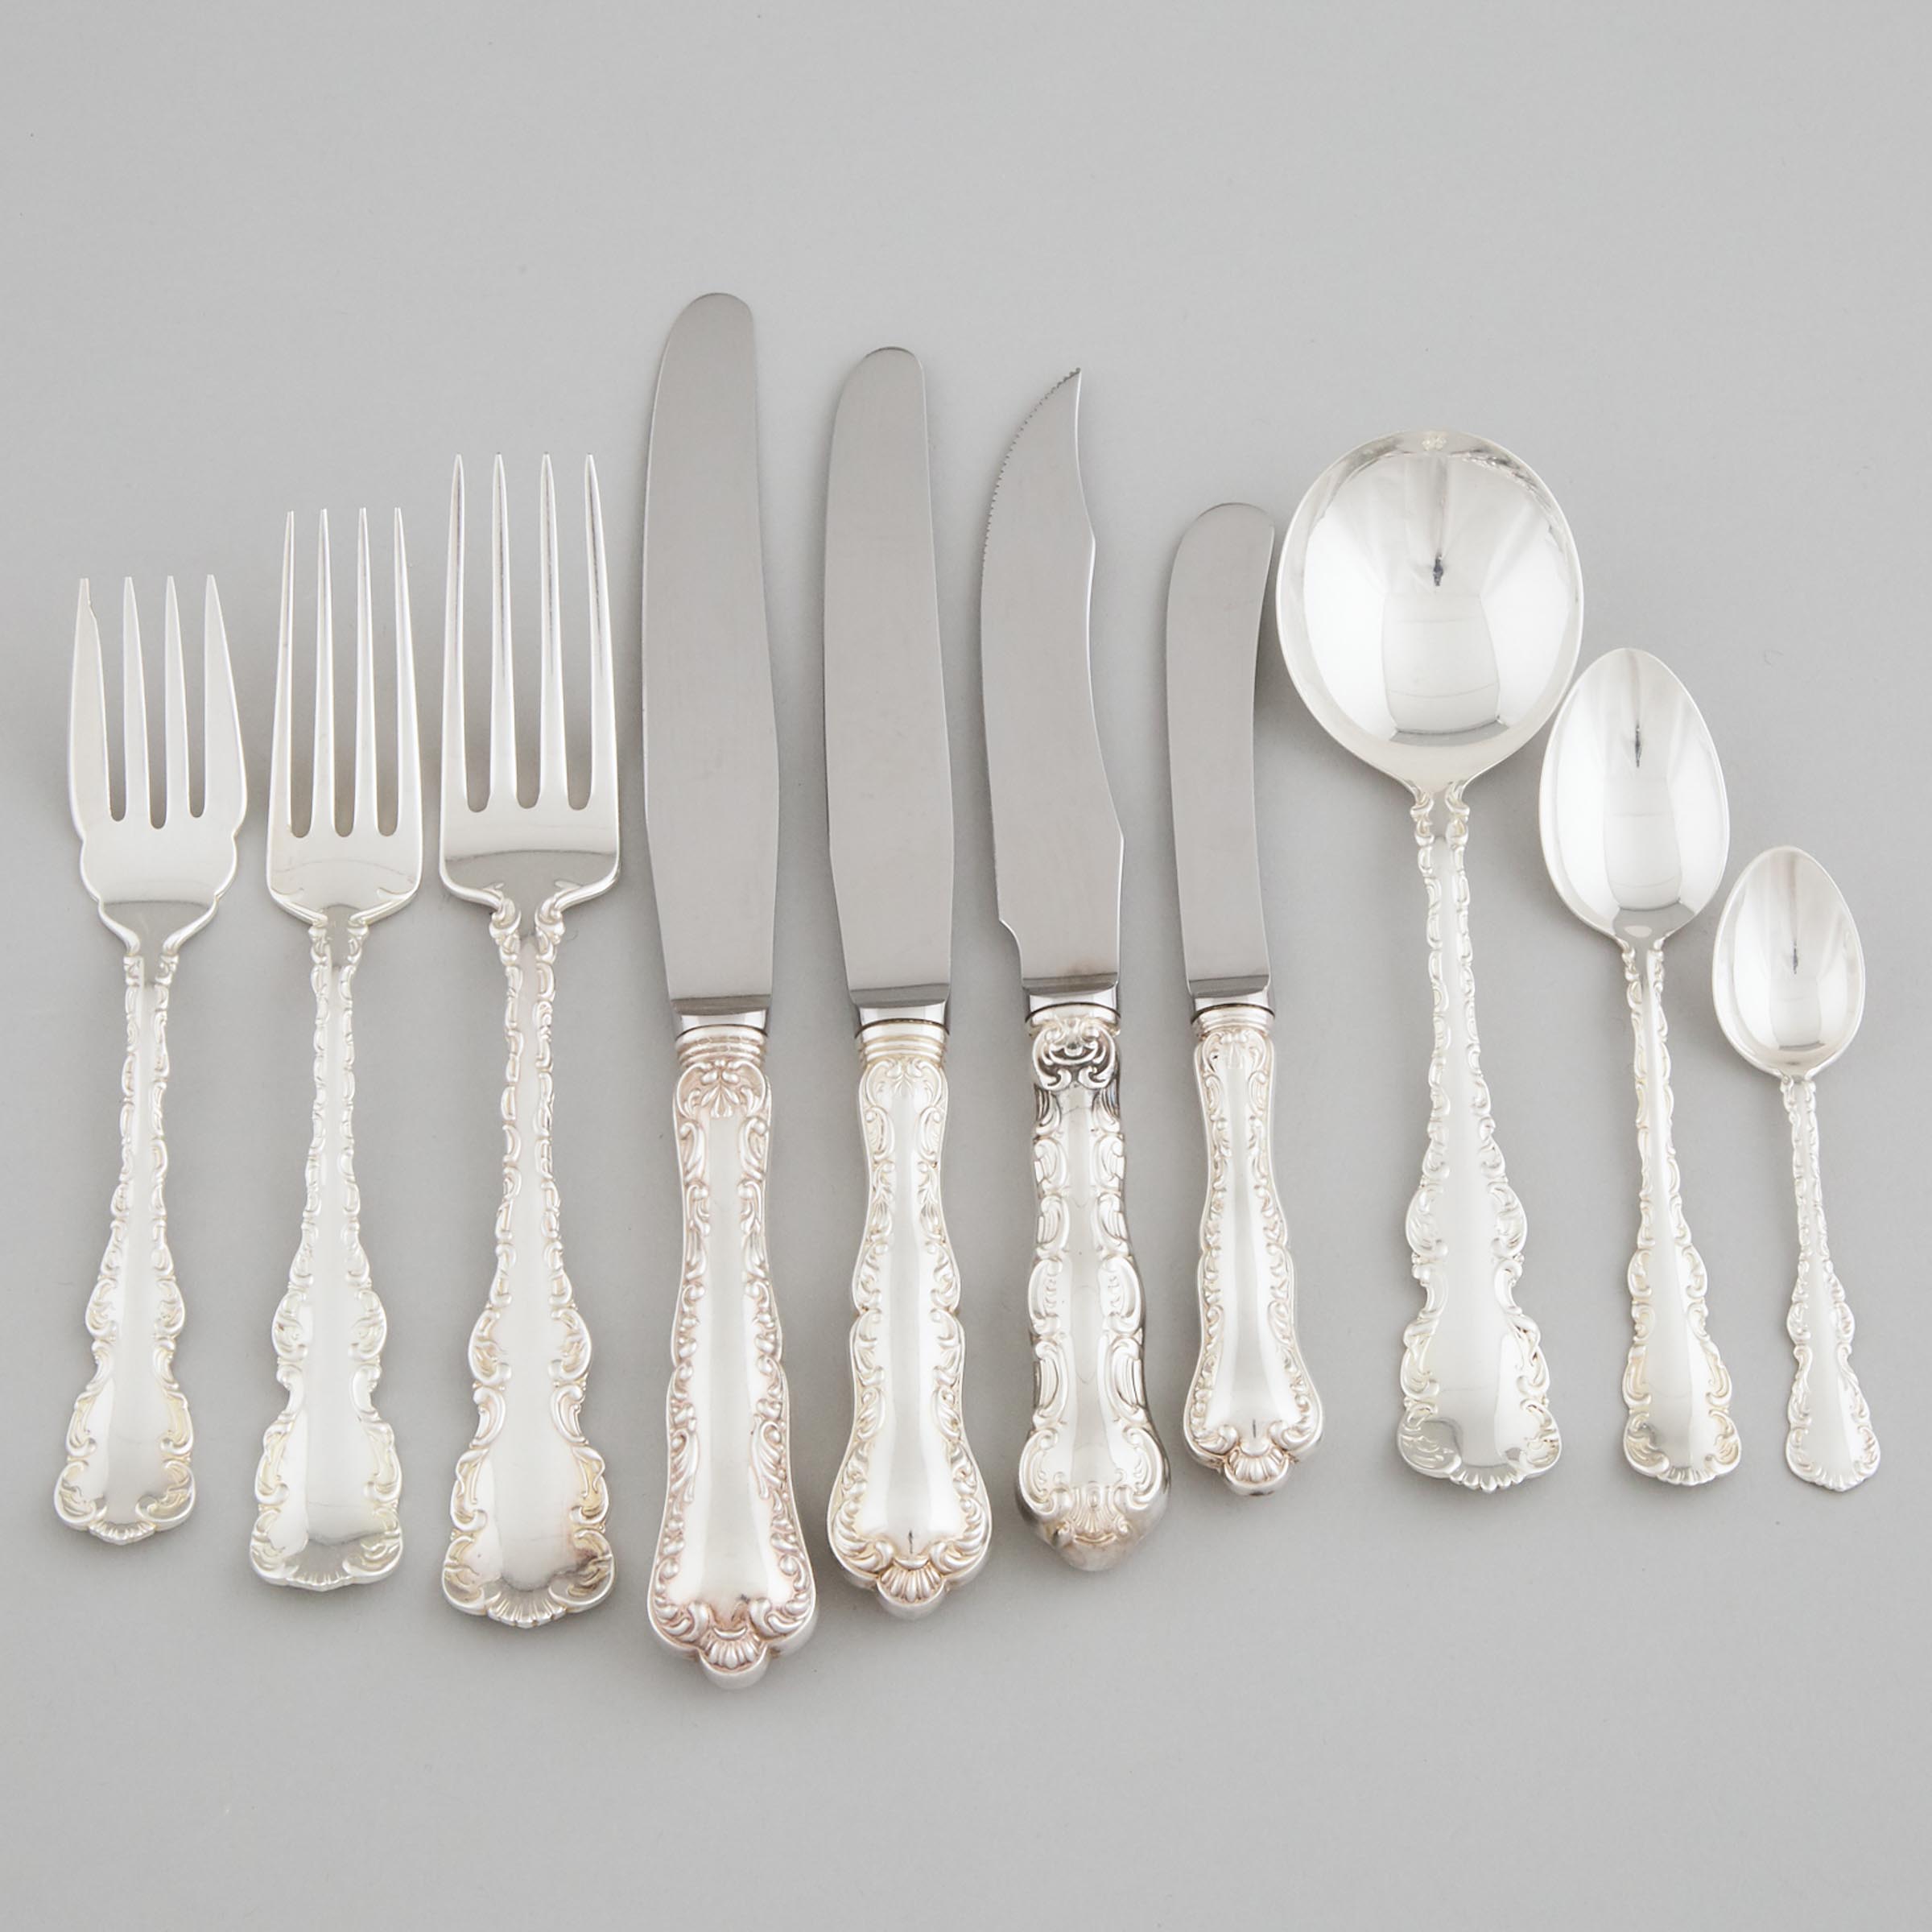 Canadian Silver 'Louis XV' Pattern Flatware Service, Henry Birks & Sons, Montreal, Que., 20th century